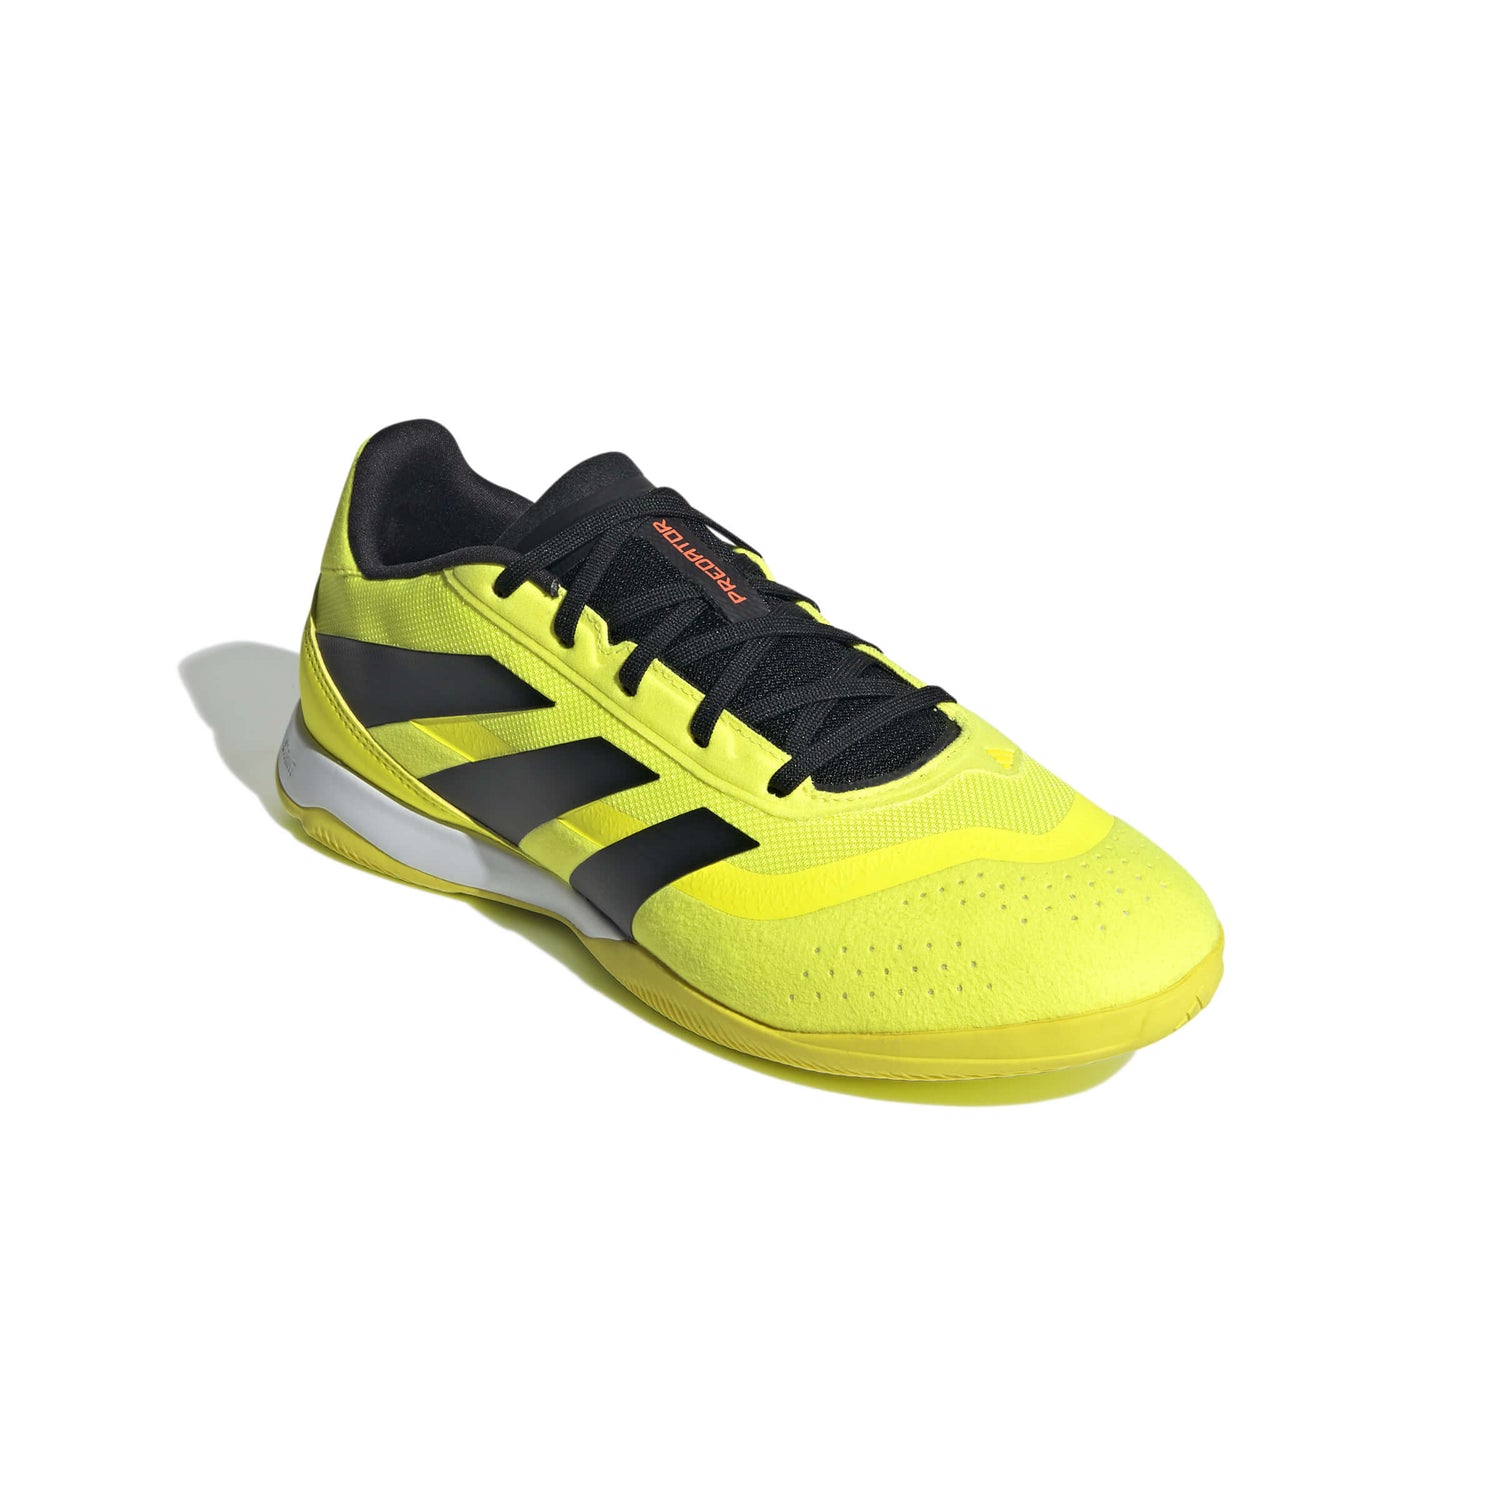 adidas Predator League Indoor - Energy Citrus Pack (SP24) (Lateral - Front)